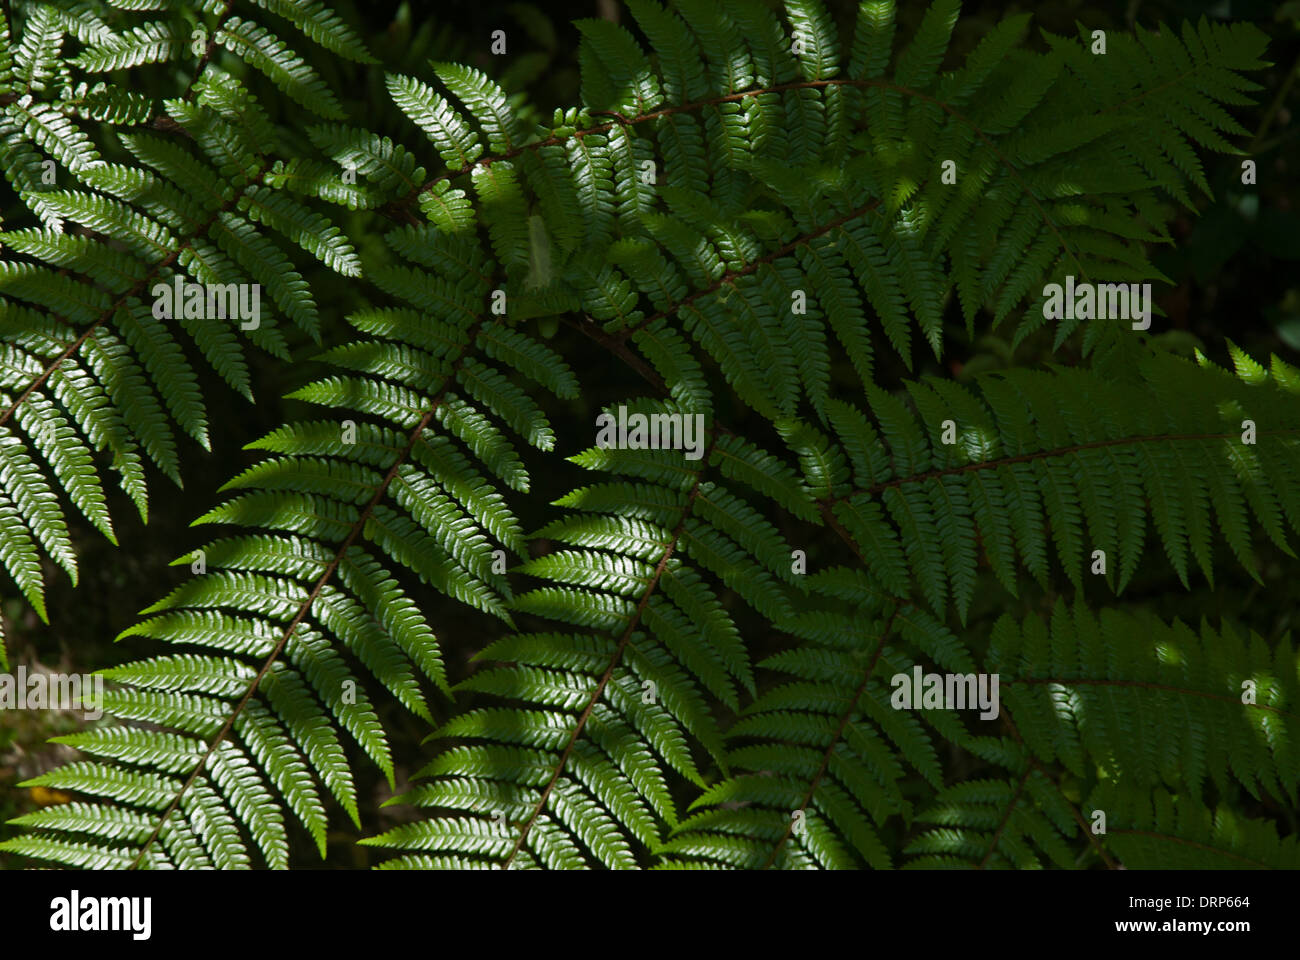 Fern leaves in sunshine and shadow Stock Photo